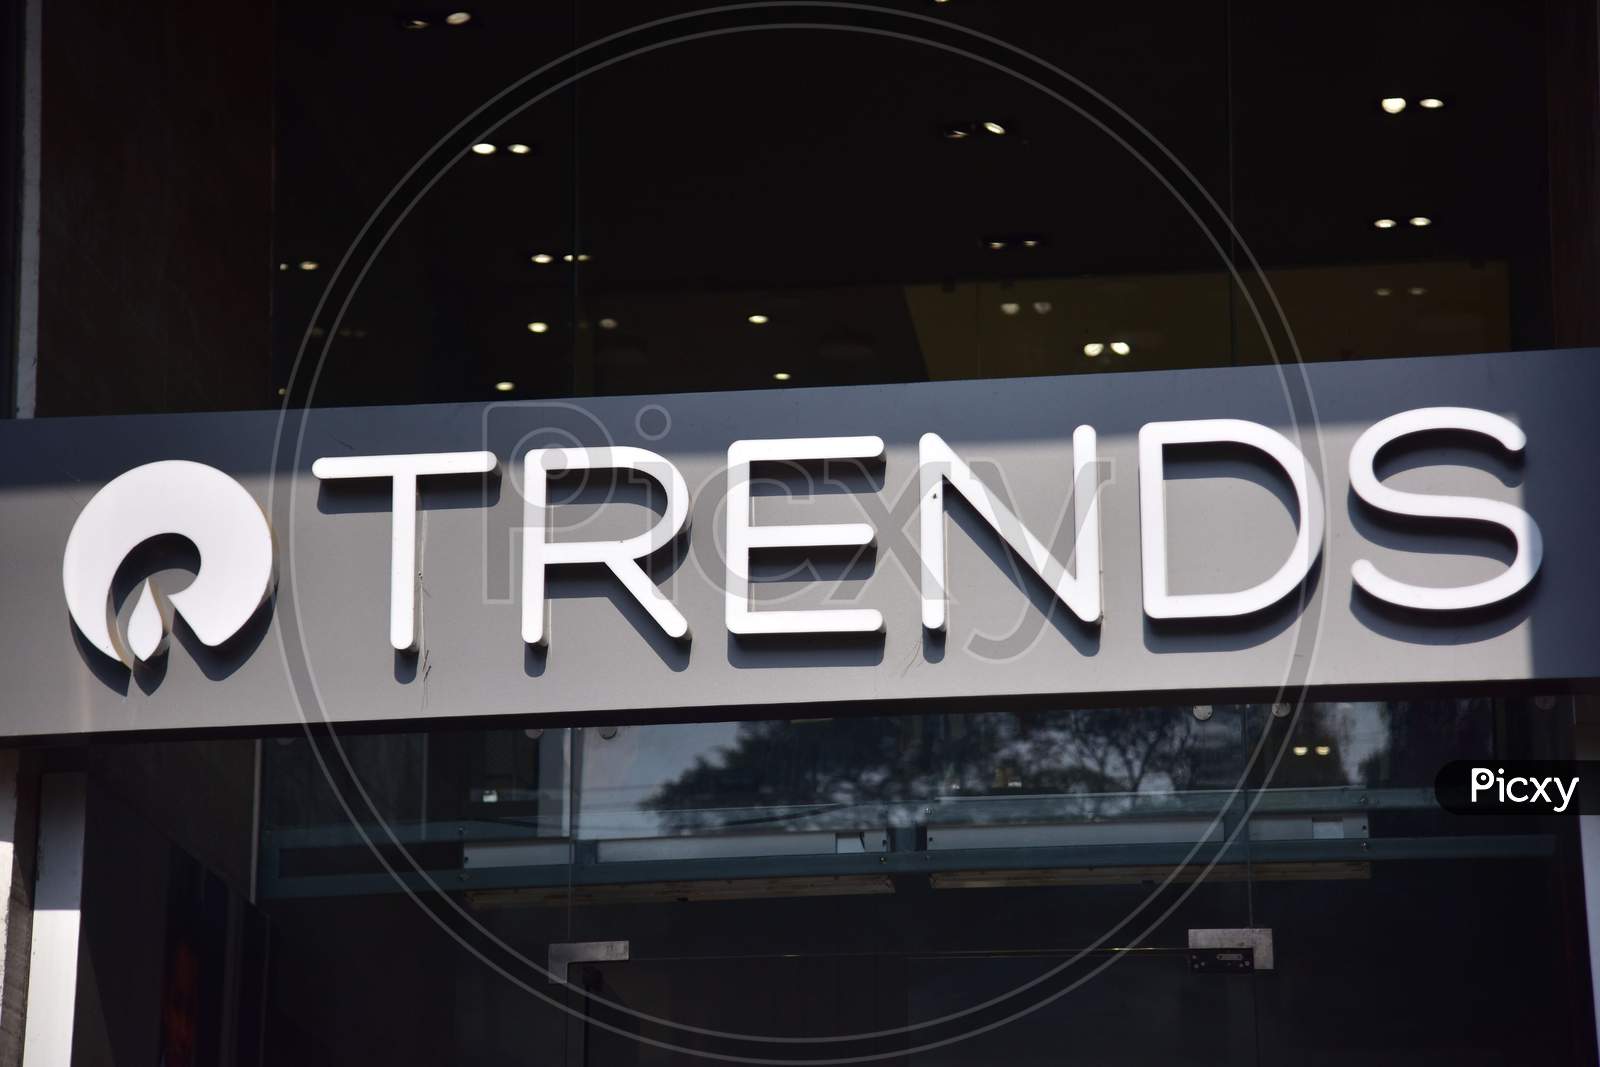 Reliance Trends - Clothing Store